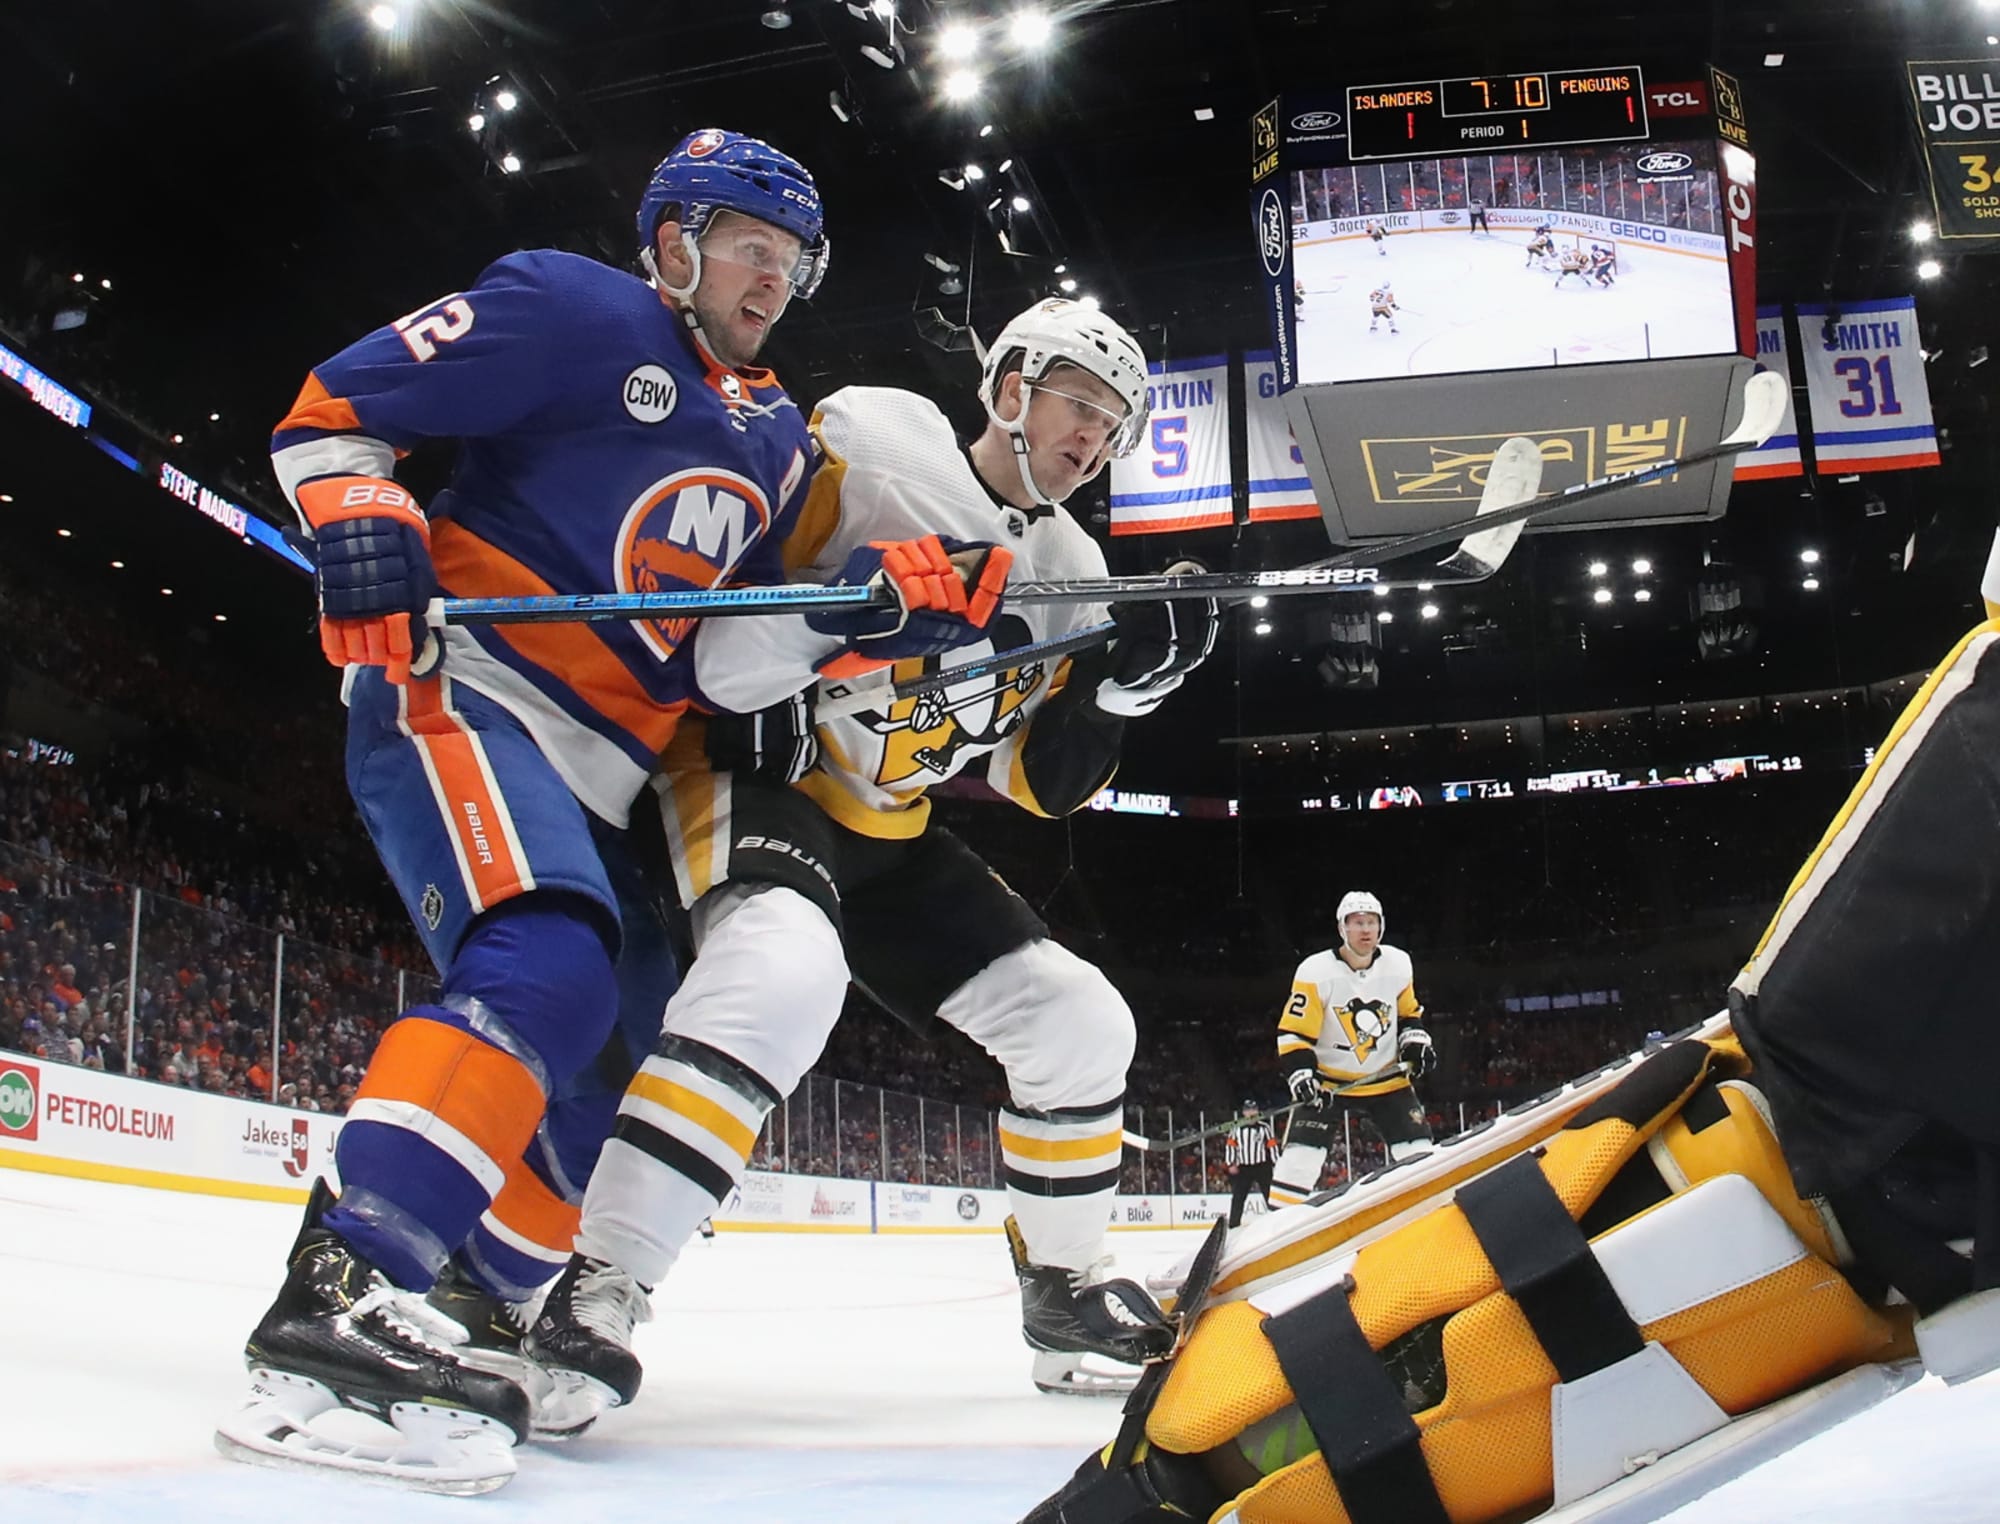 Stanley Cup Playoffs Penguins vs Islanders Game 2 start time, live stream